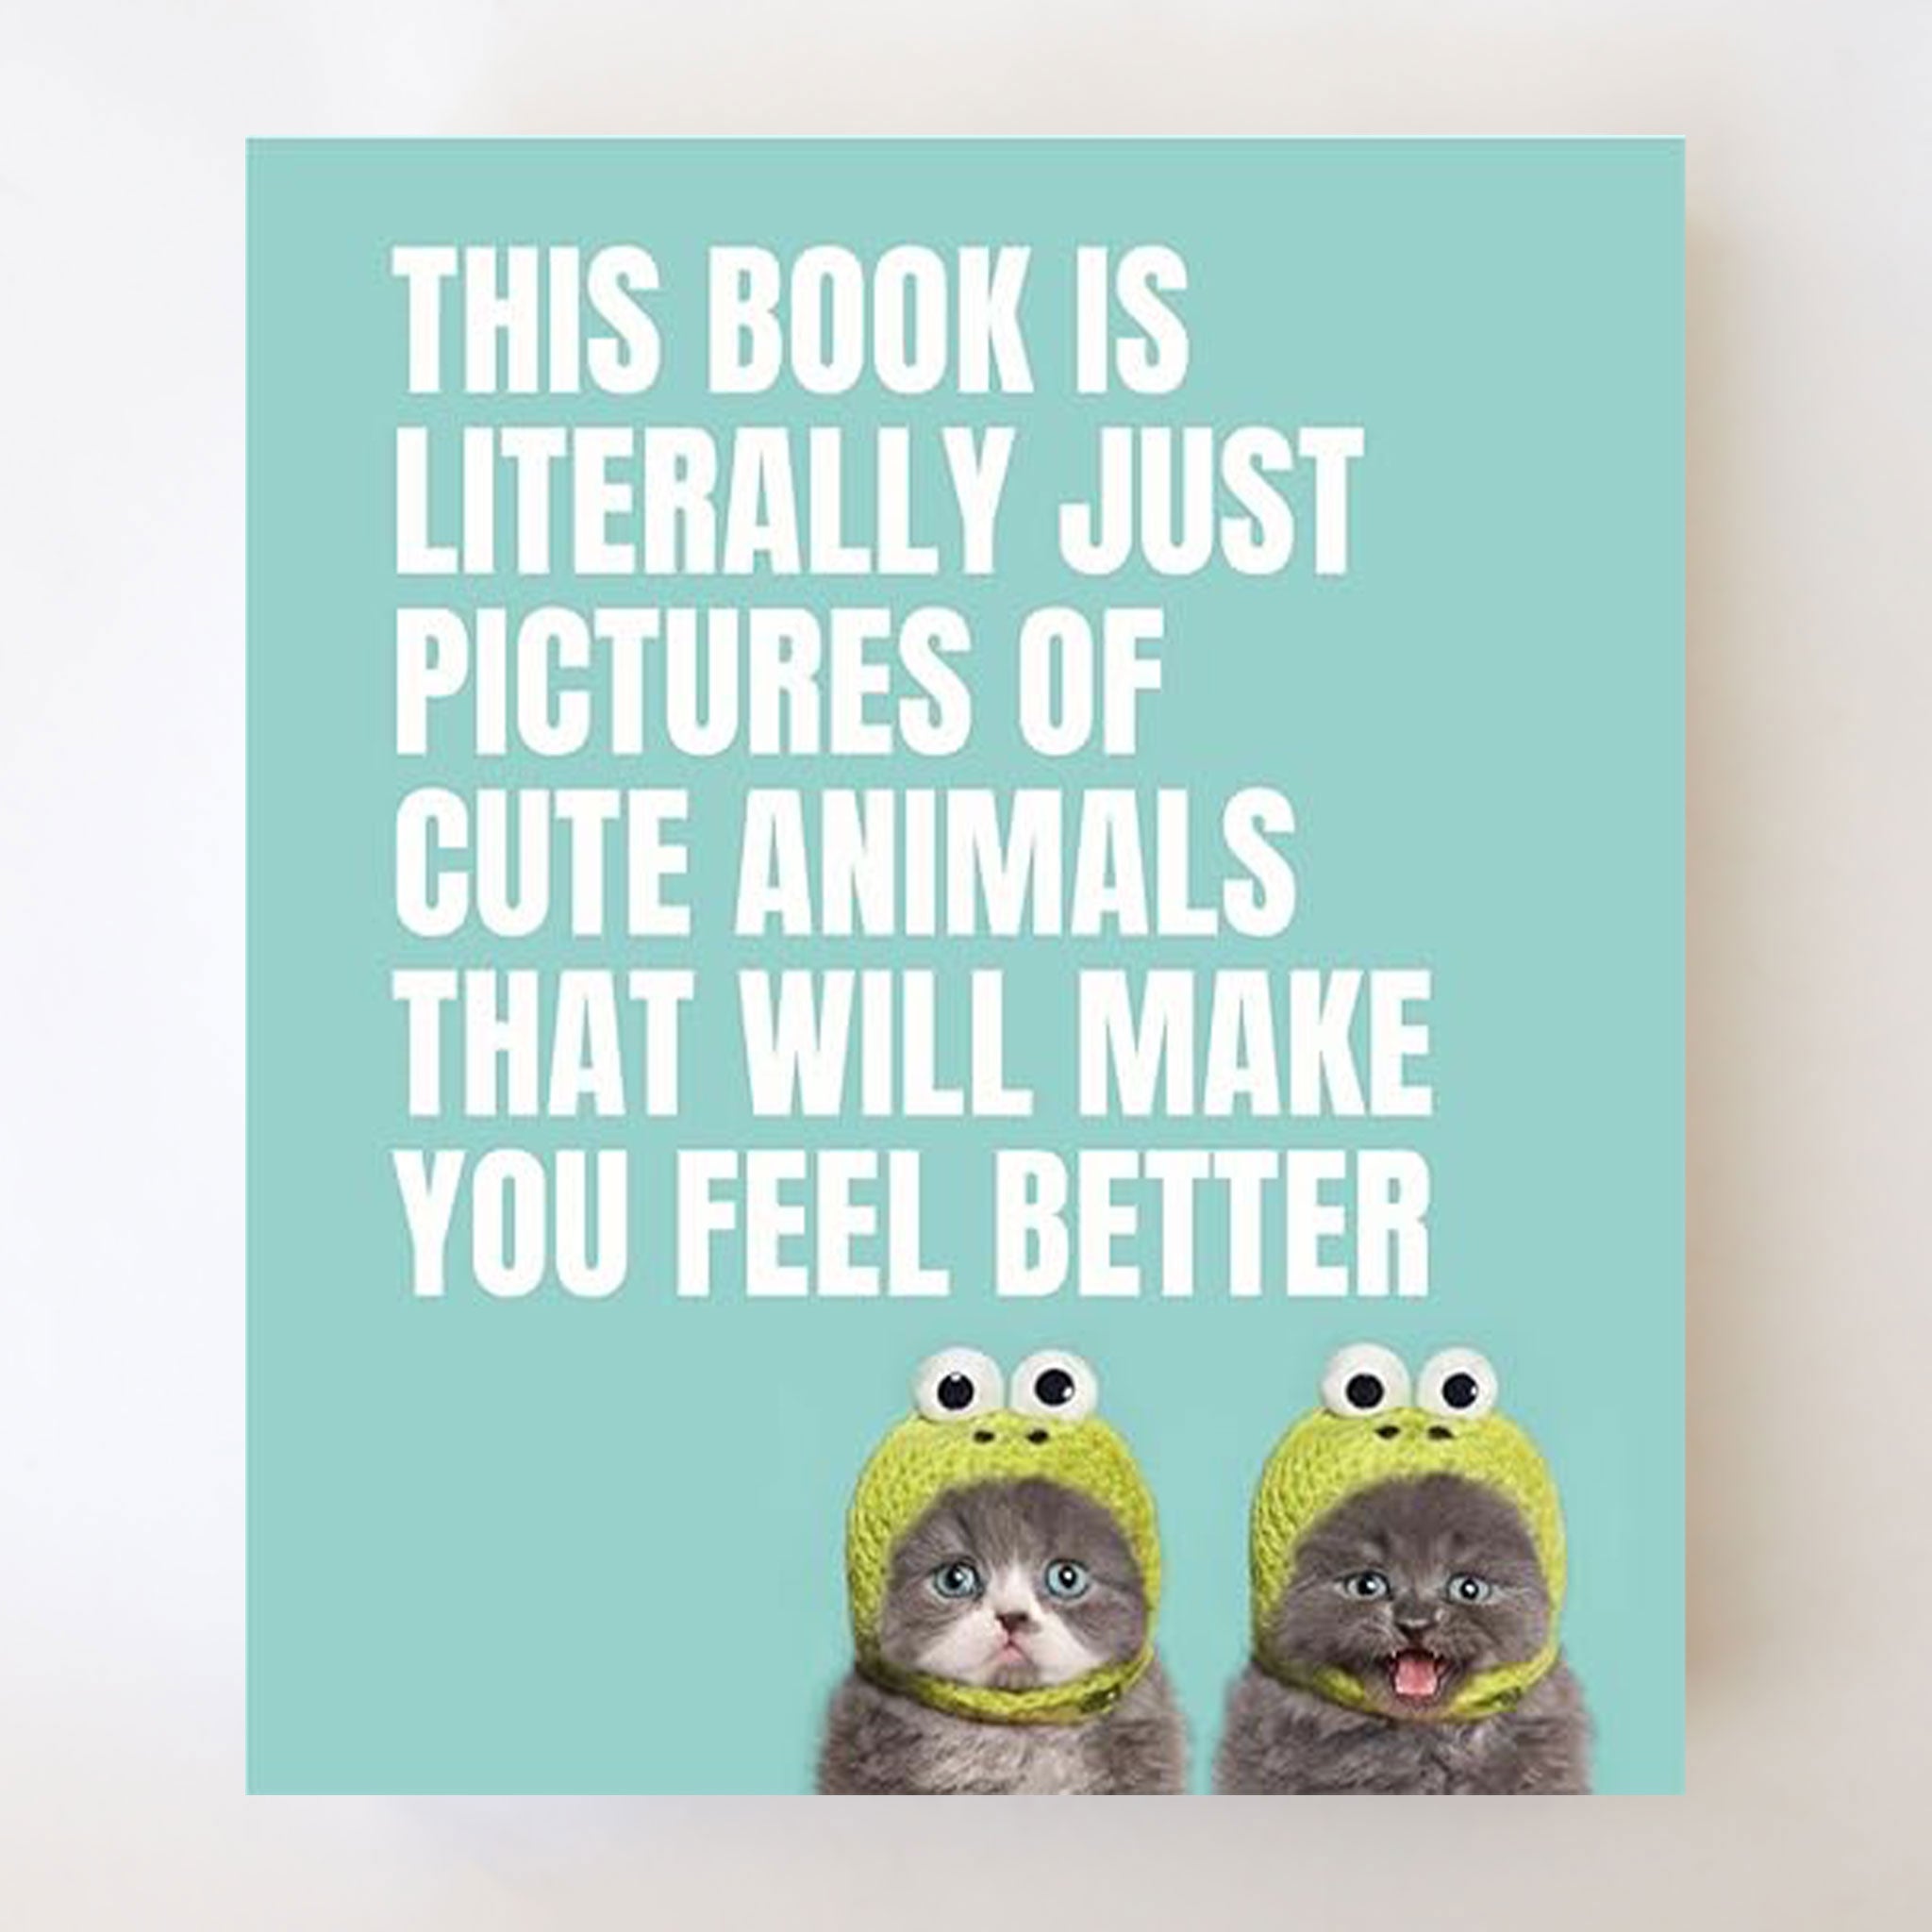 On a white background is a blue book cover with two small grey kittens and white text that reads, "This Book Is Literally Just Pictures Of Cute Animals That Will Make You Feel Better". 